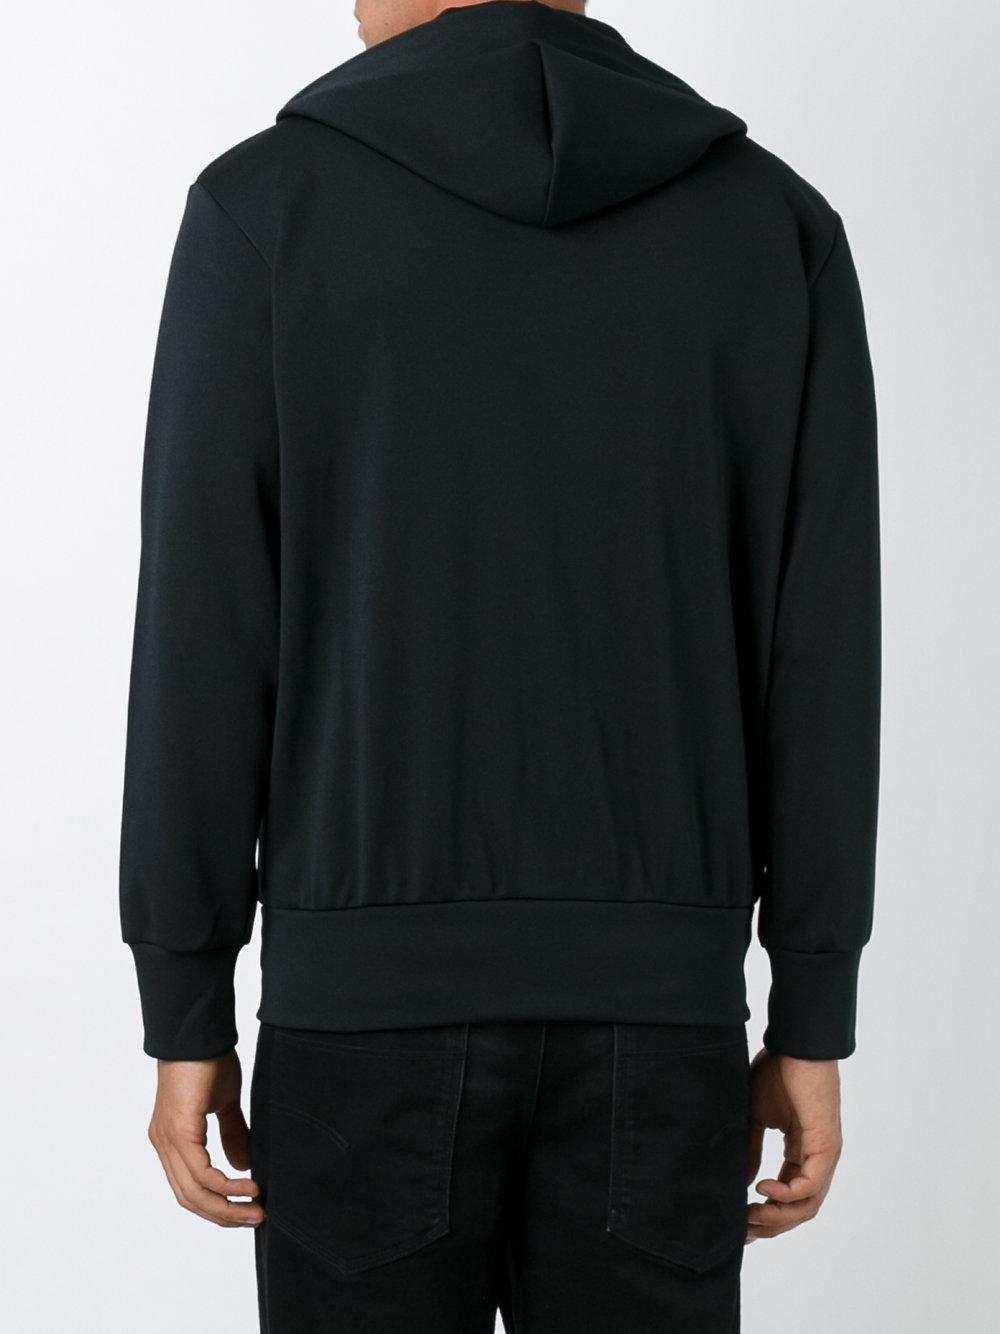 COMME DES GARÇONS PLAY Wool Embroidered Heart Patch Sweatshirt in Black ...